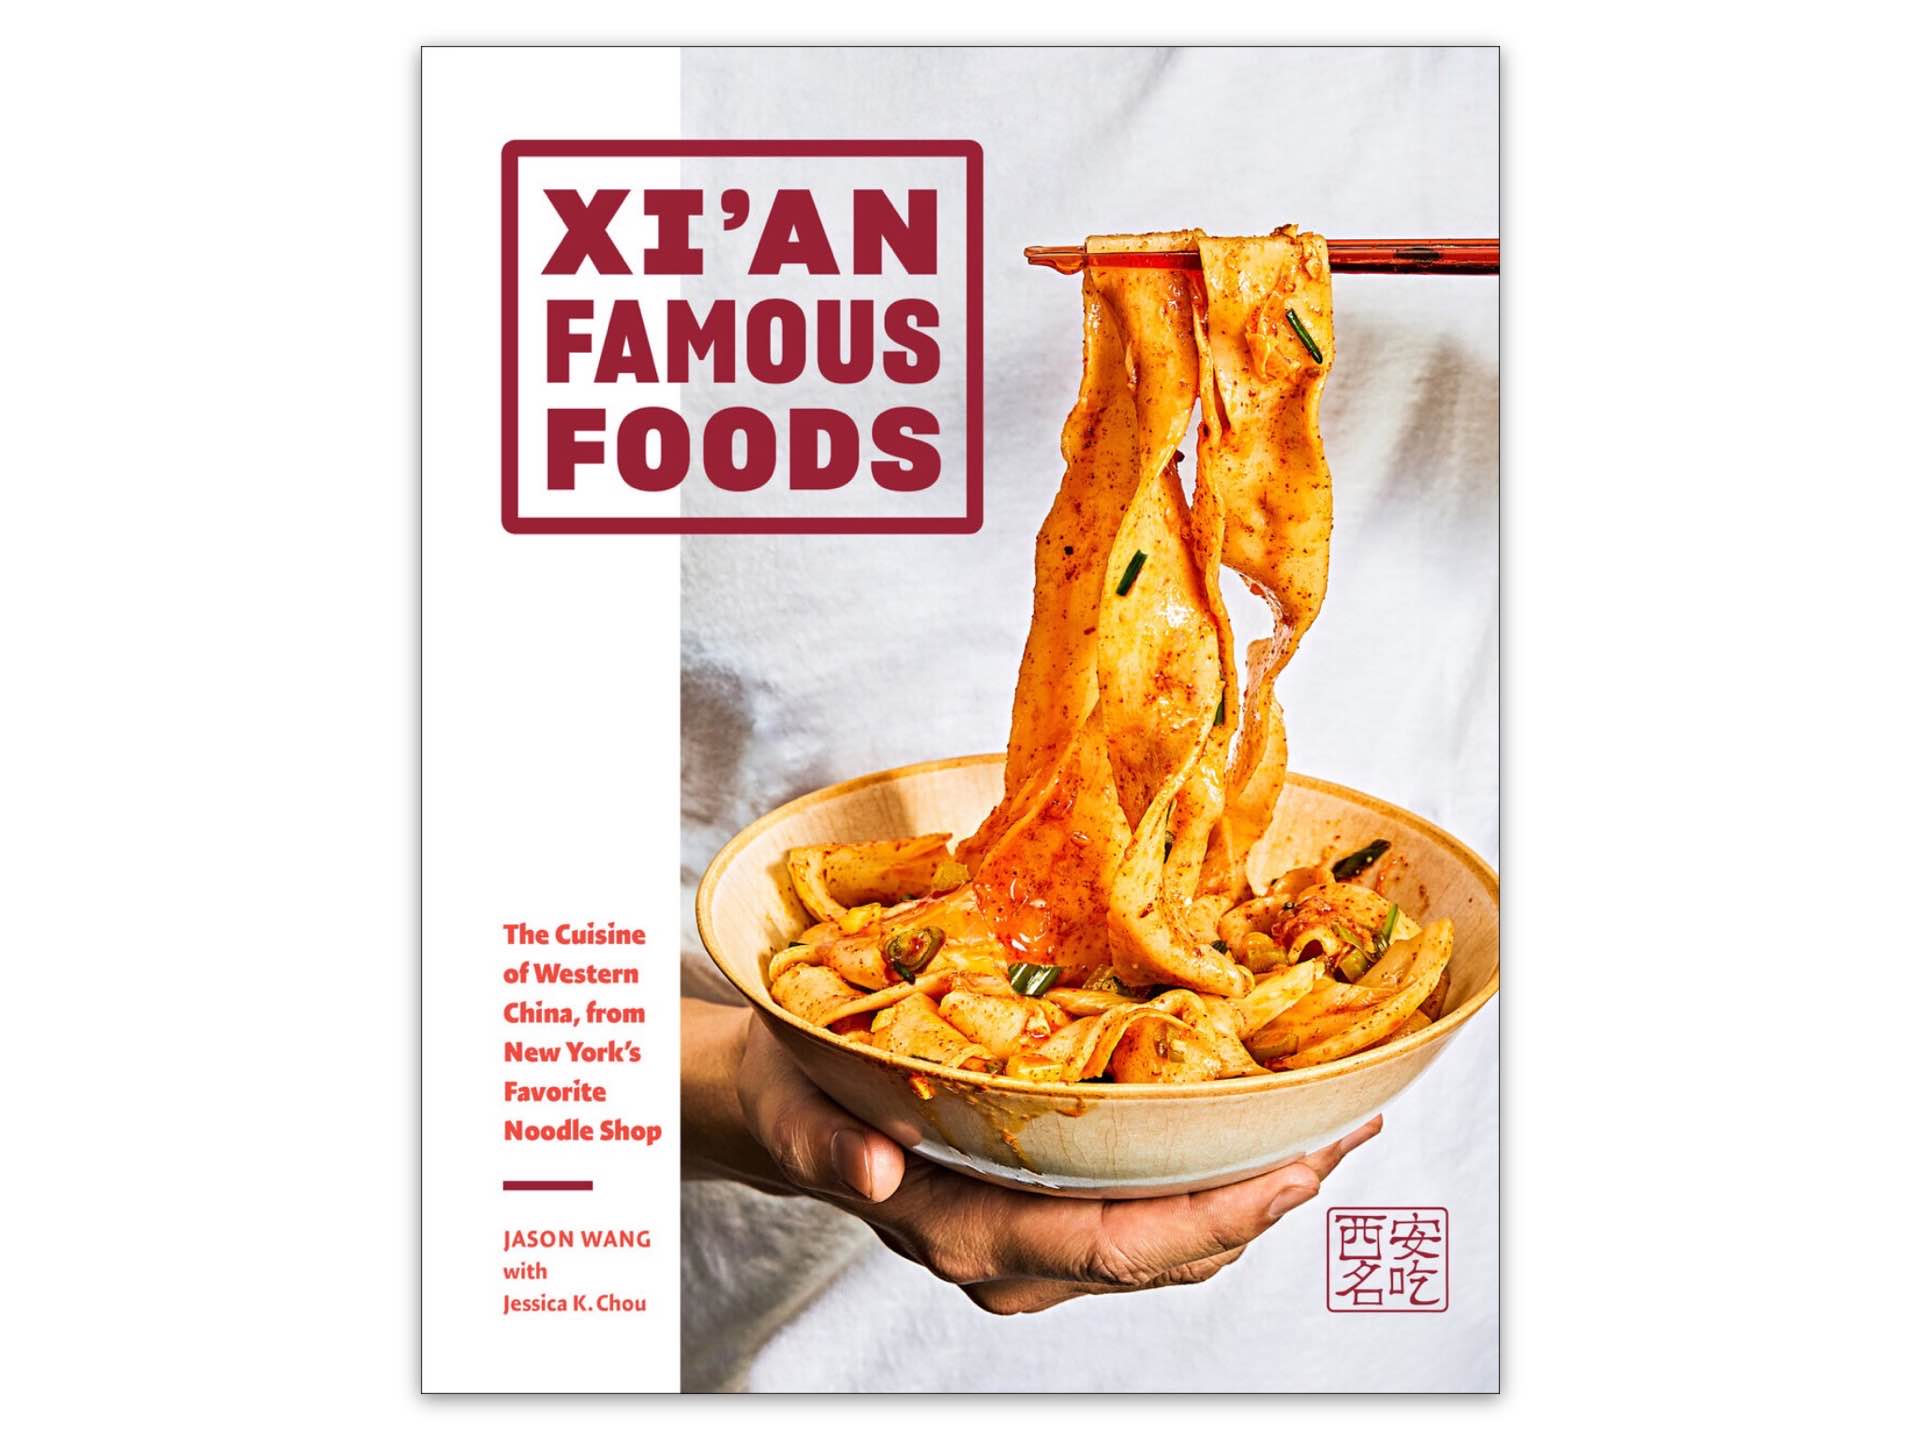 The Xi'an Famous Foods cookbook by Jason Wang. ($32 hardcover)